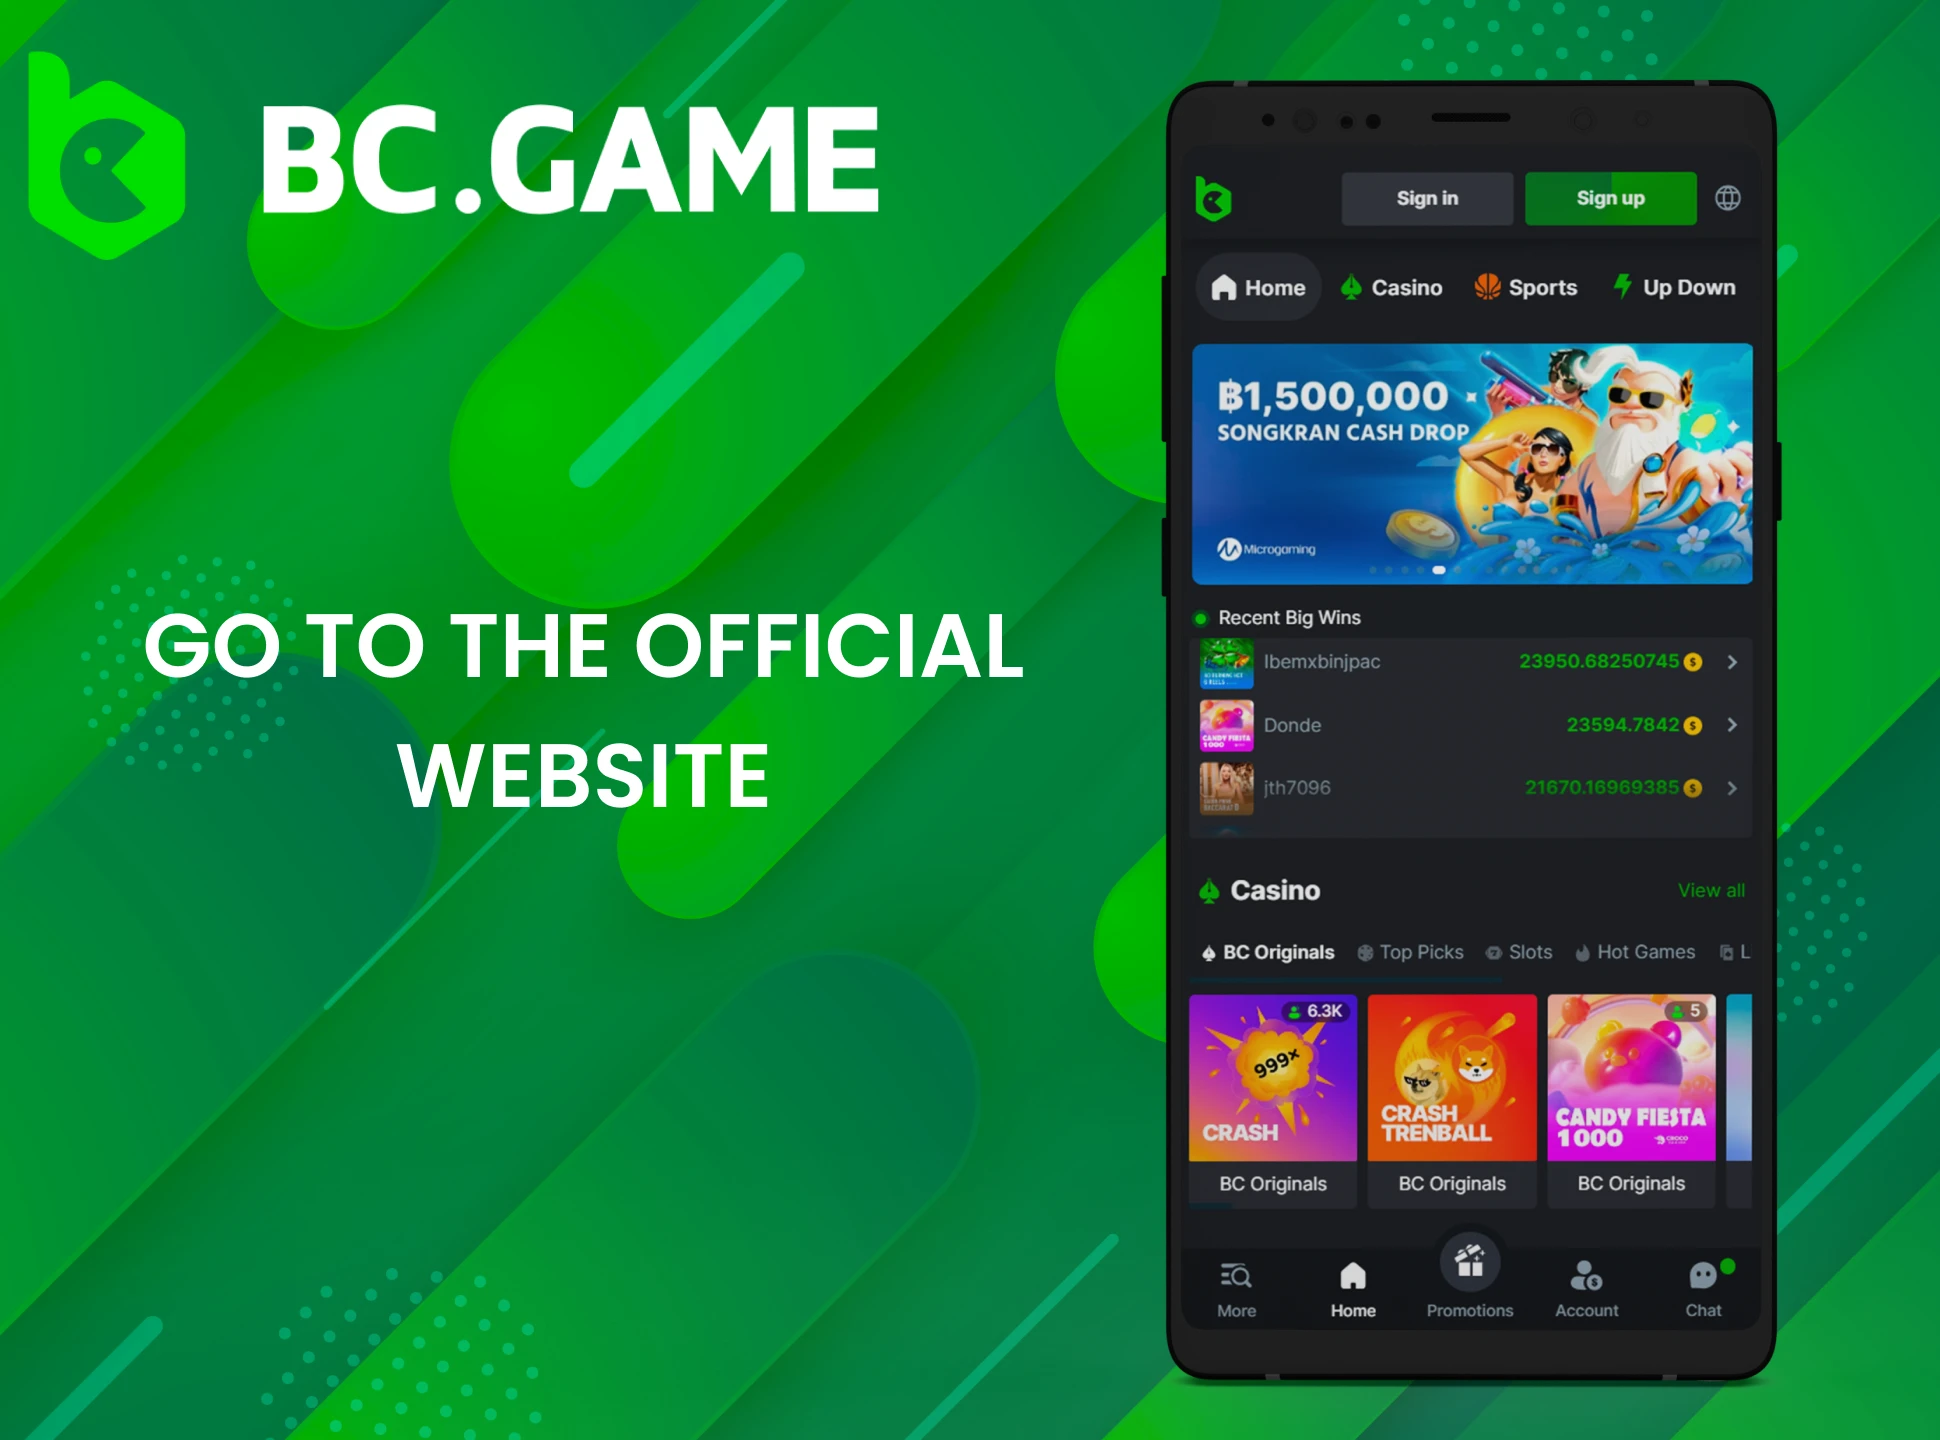 Visit the official BC Game website from your Android device.